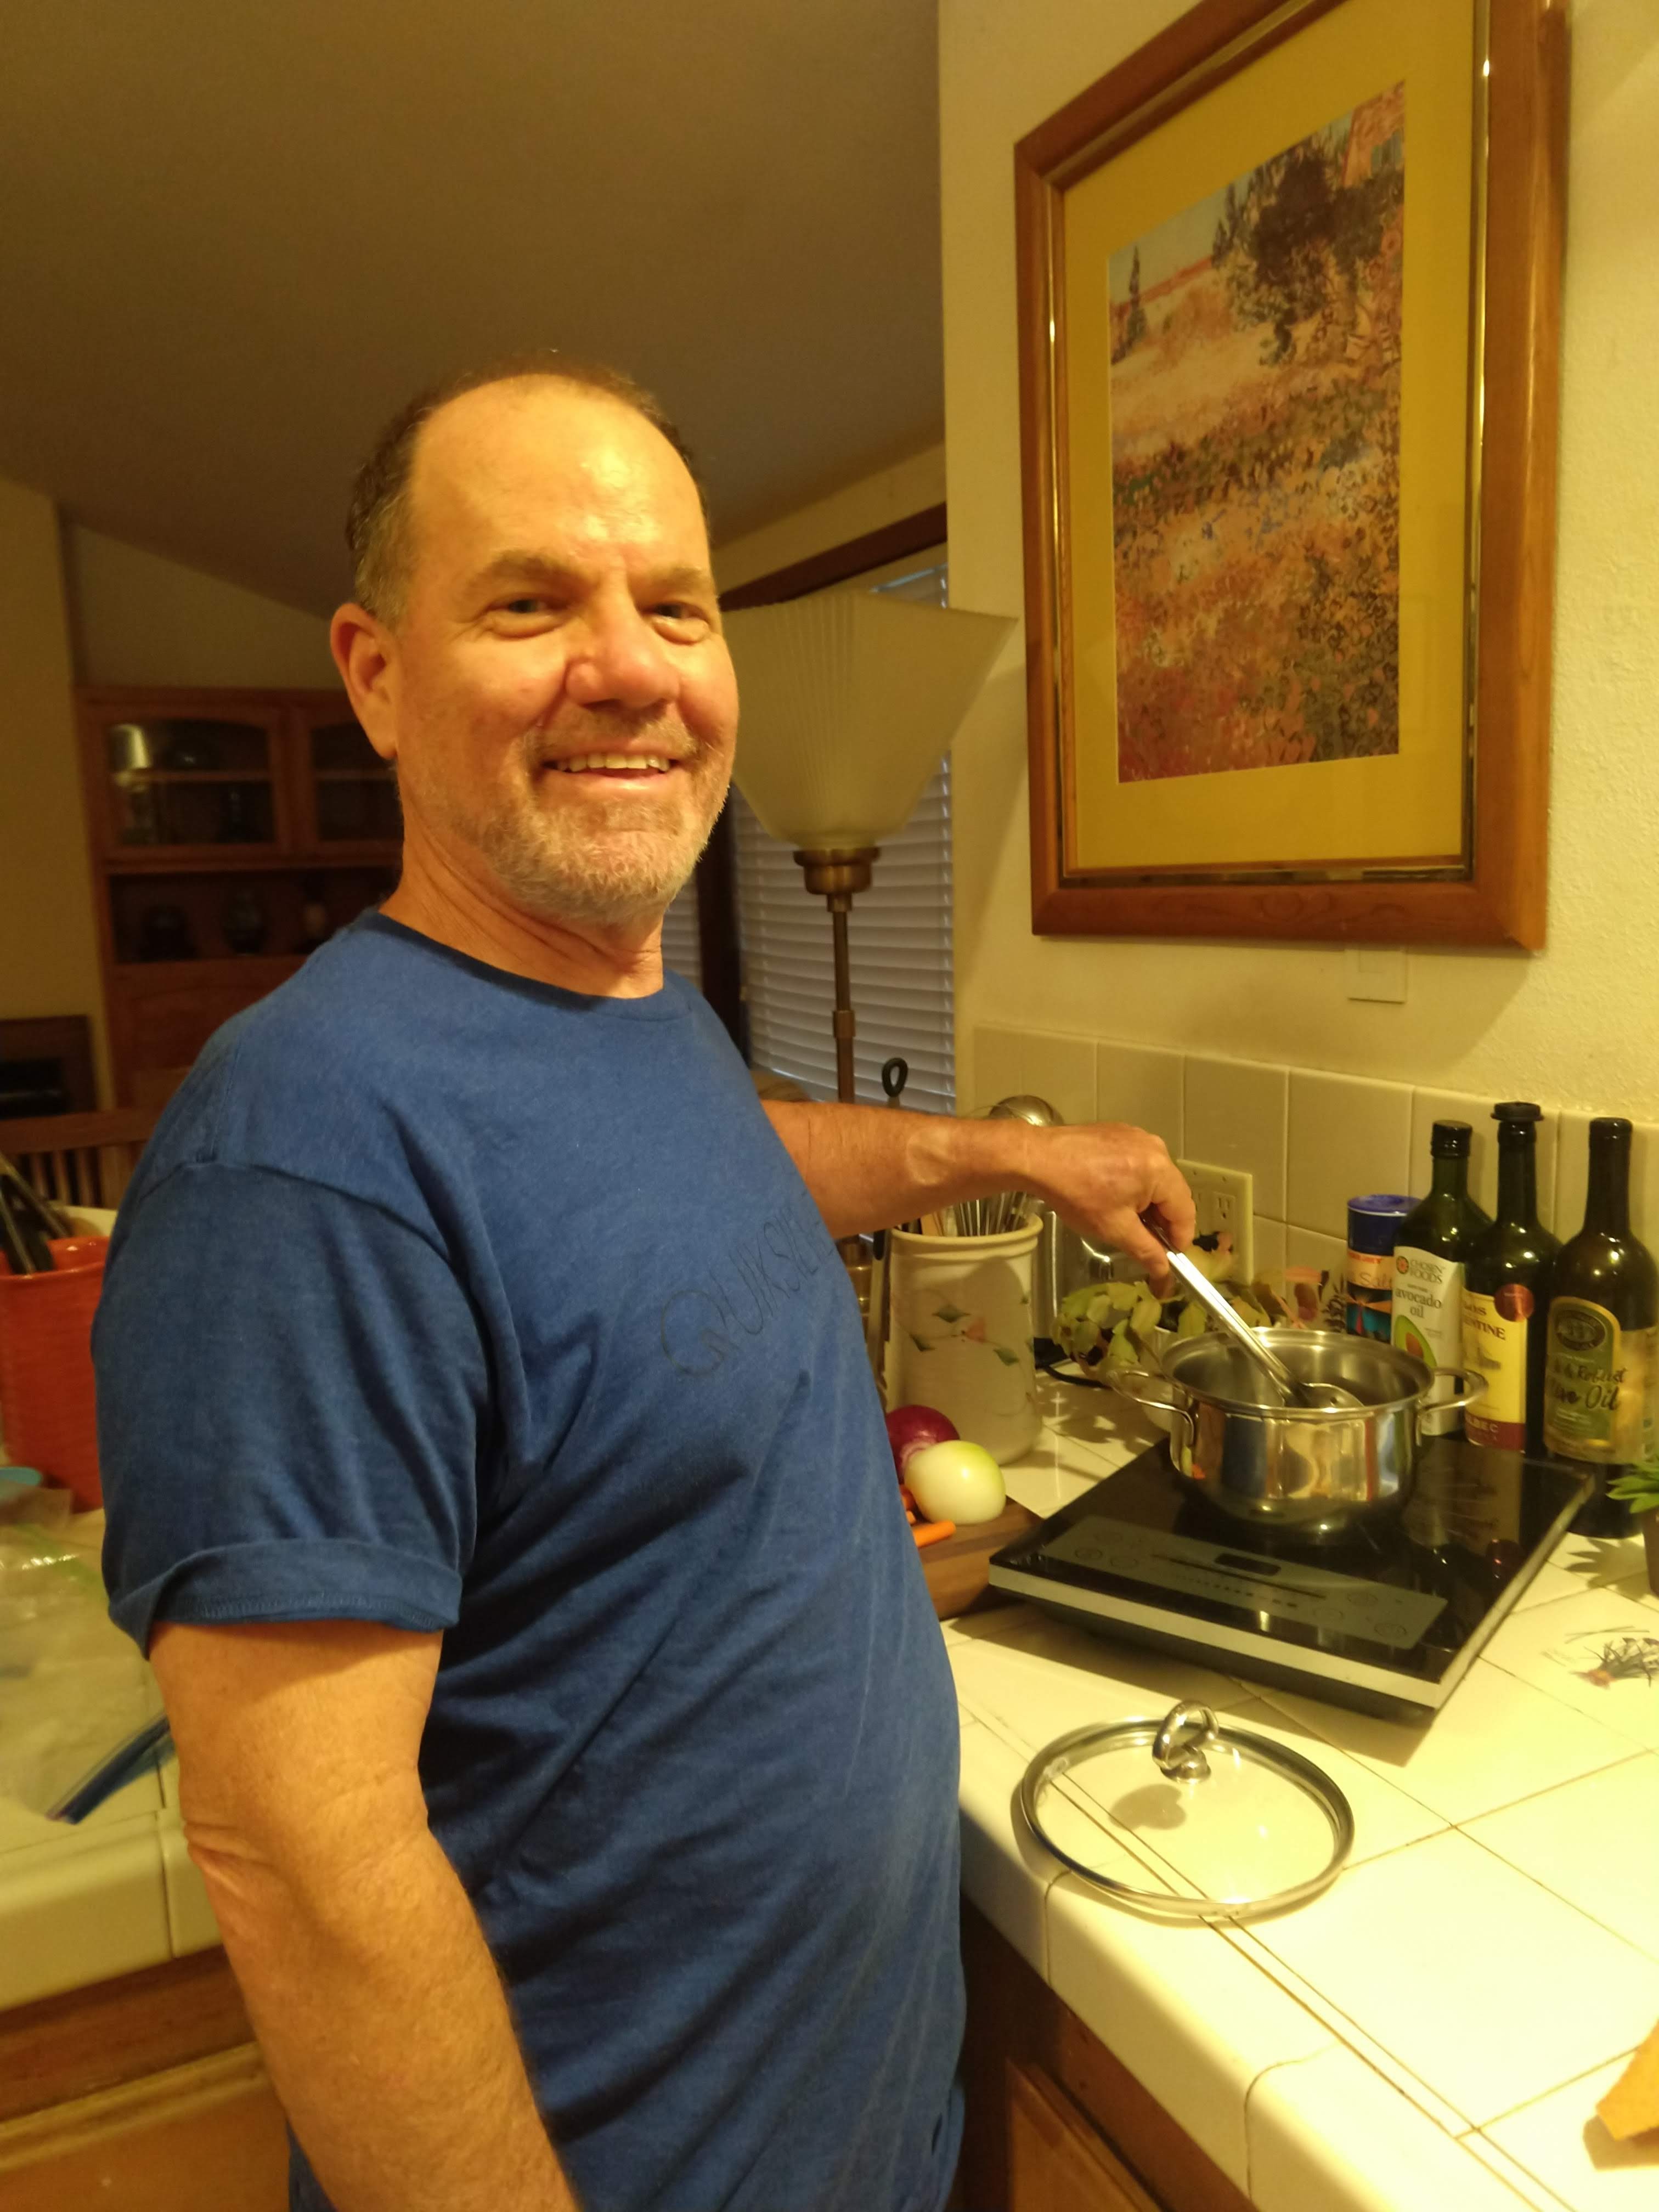 Man in front of Induction Stove